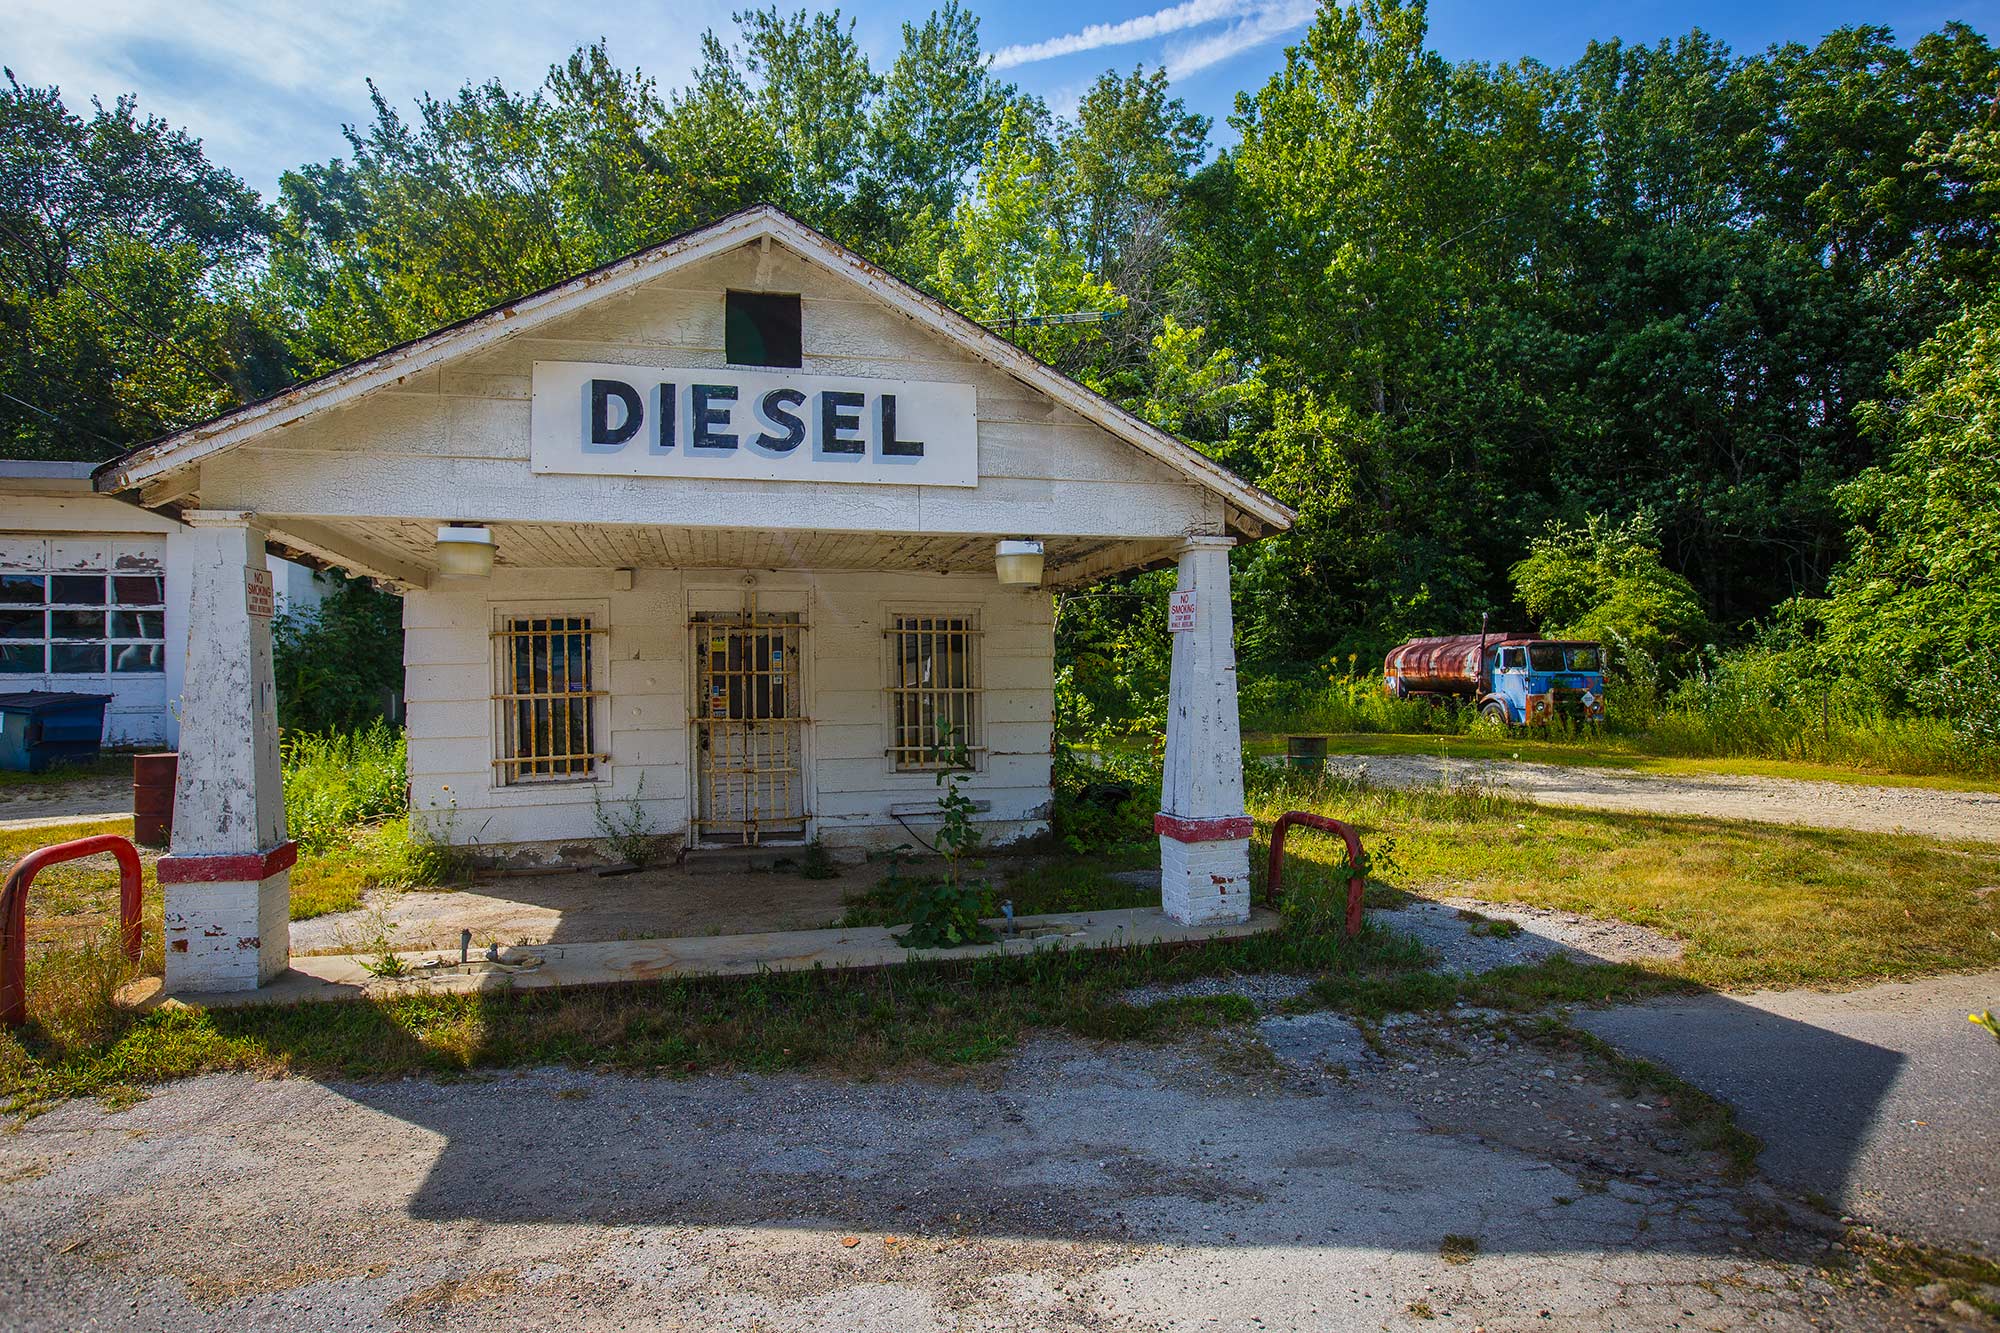 Abandoned Gas Station, Brooklyn, CT - 8/29/15